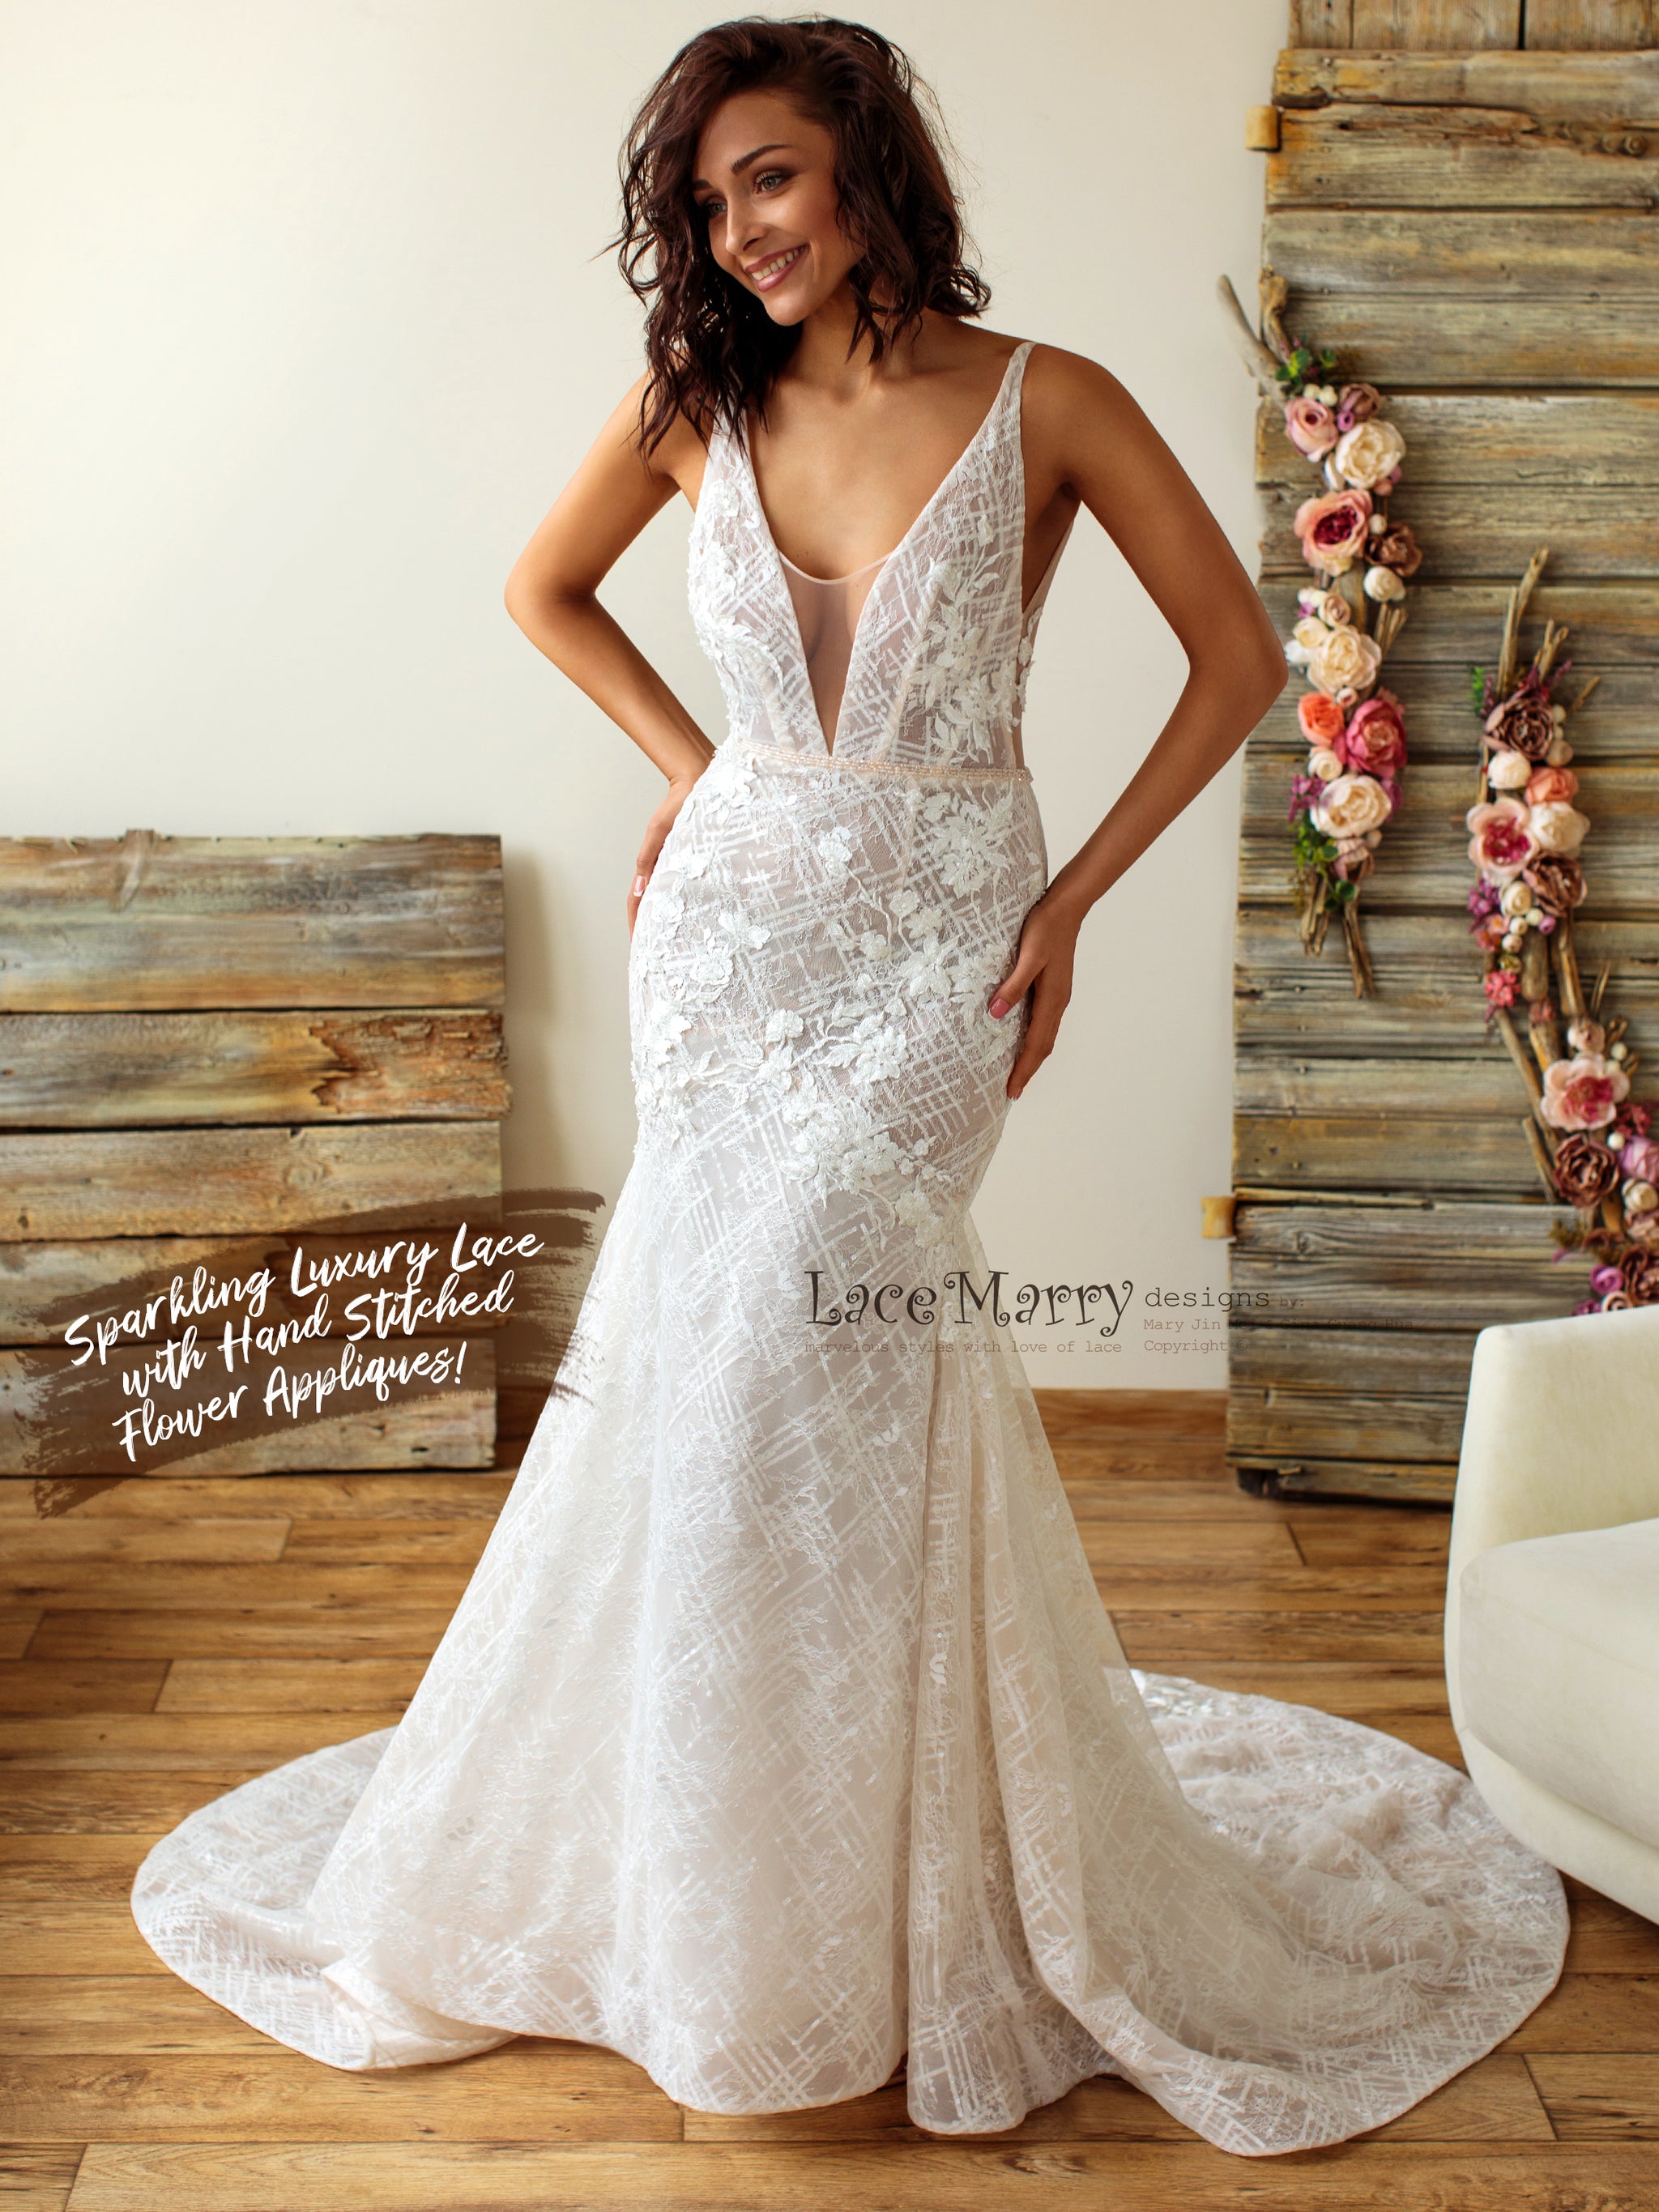 Geometric Sparkling Lace Wedding Dress - LaceMarry